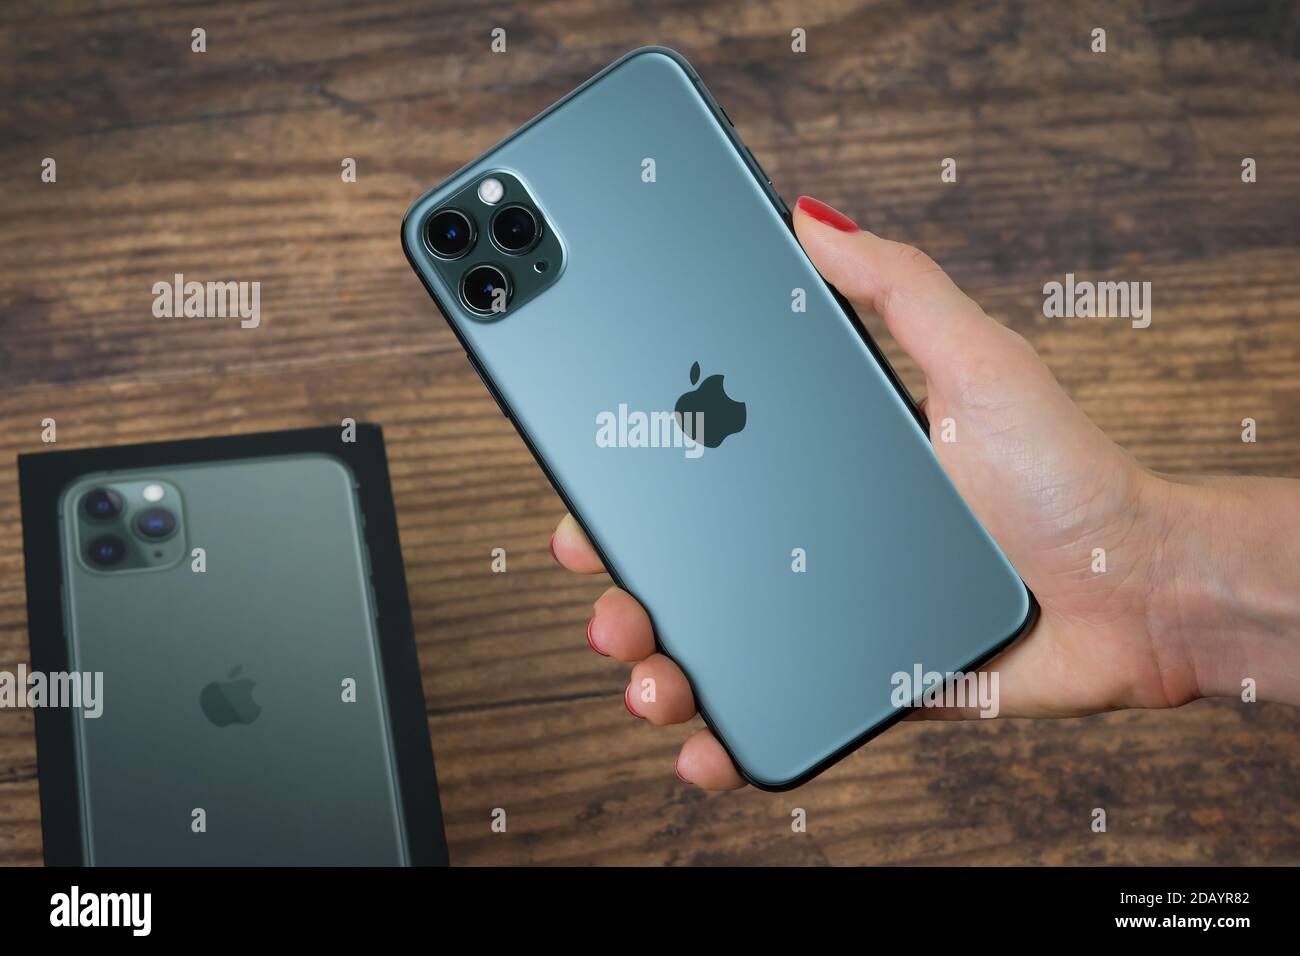 Iphone 11 Pro Max In Midnight Green Color Next To Its Box Stock Photo Alamy